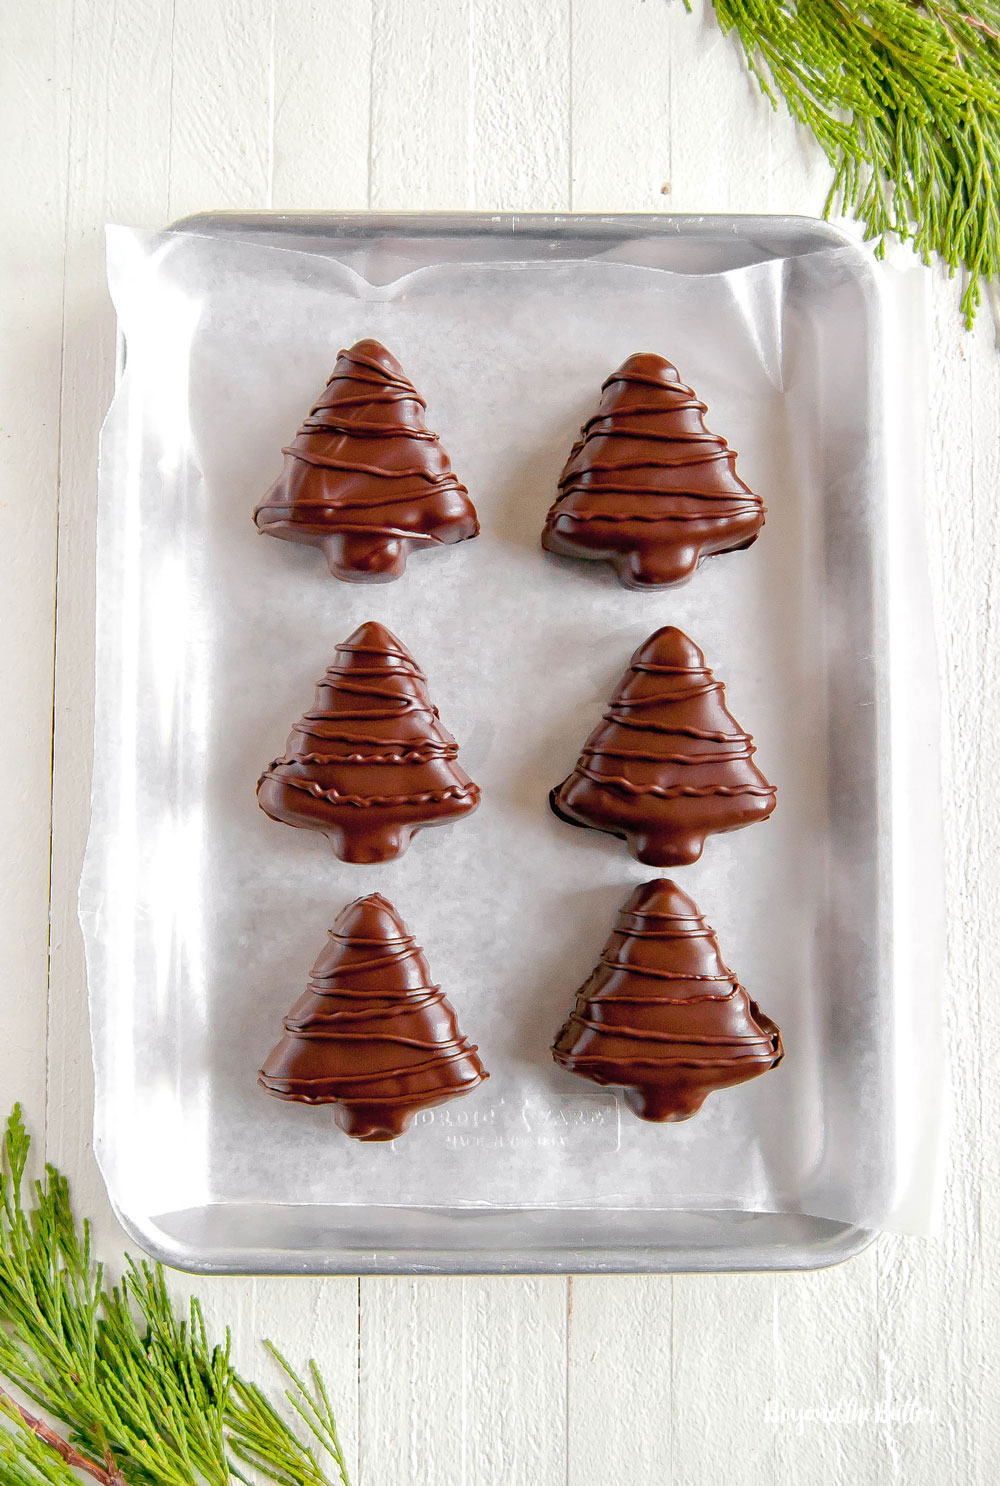 Chocolate Covered Peanut Butter Christmas Trees | All Images © Beyond the Butter, LLC